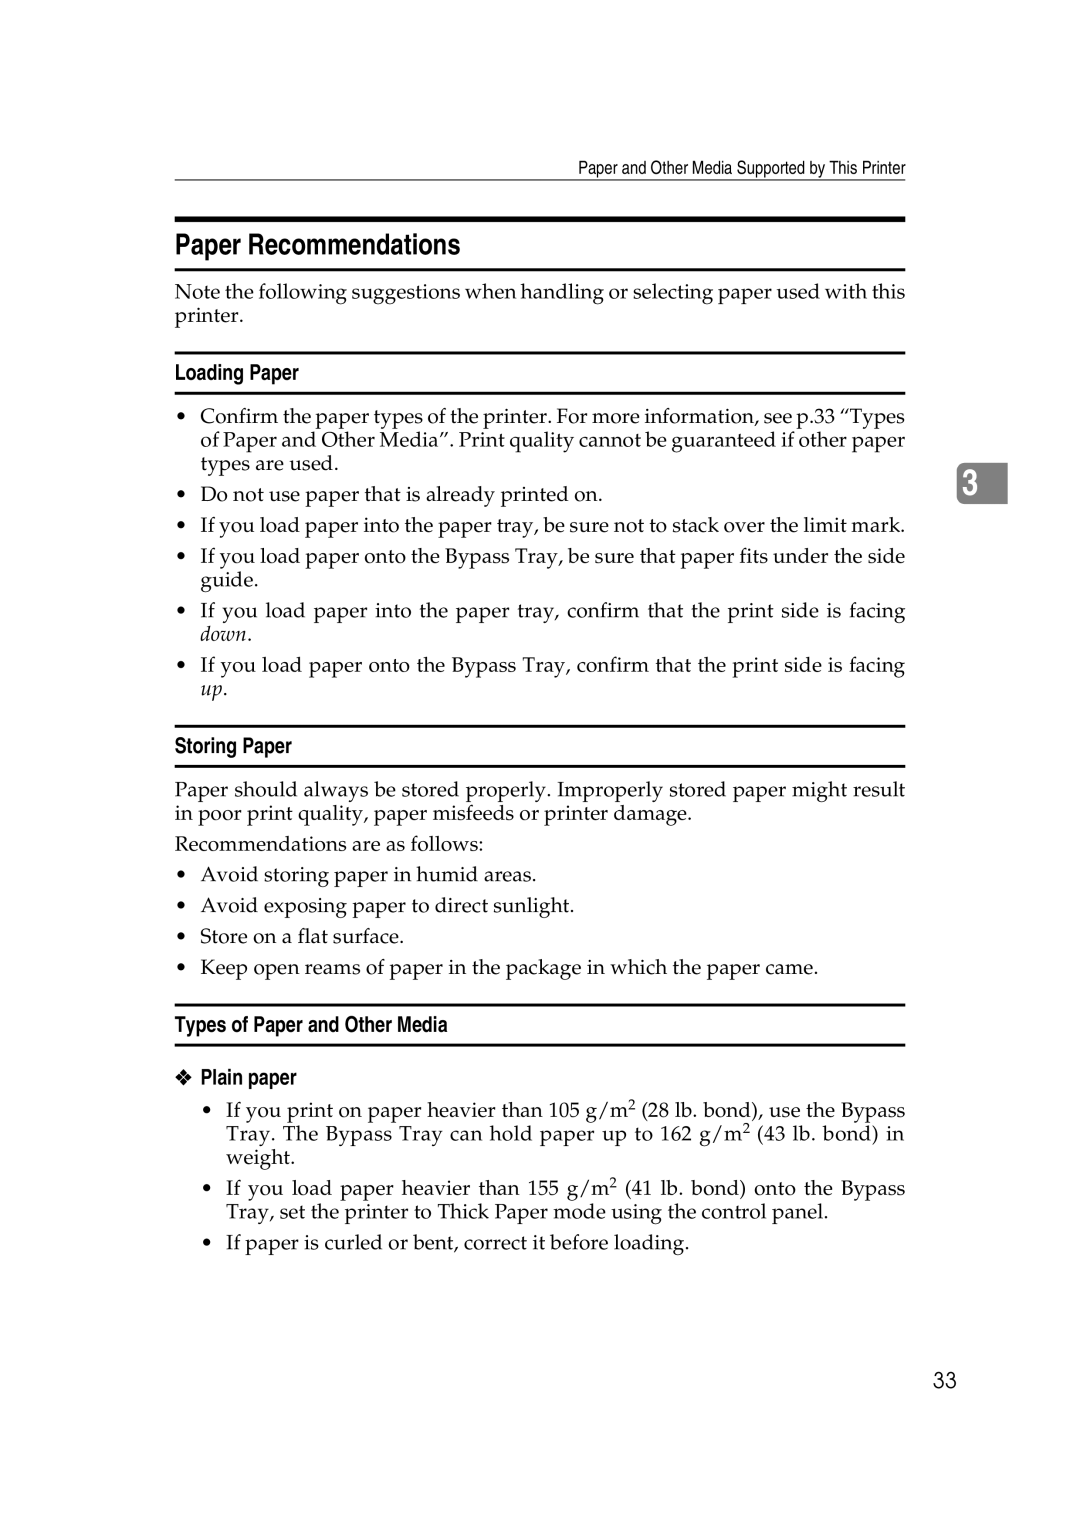 Lanier AP2610 manual Paper Recommendations, Loading Paper, Storing Paper, Types of Paper and Other Media Plain paper 